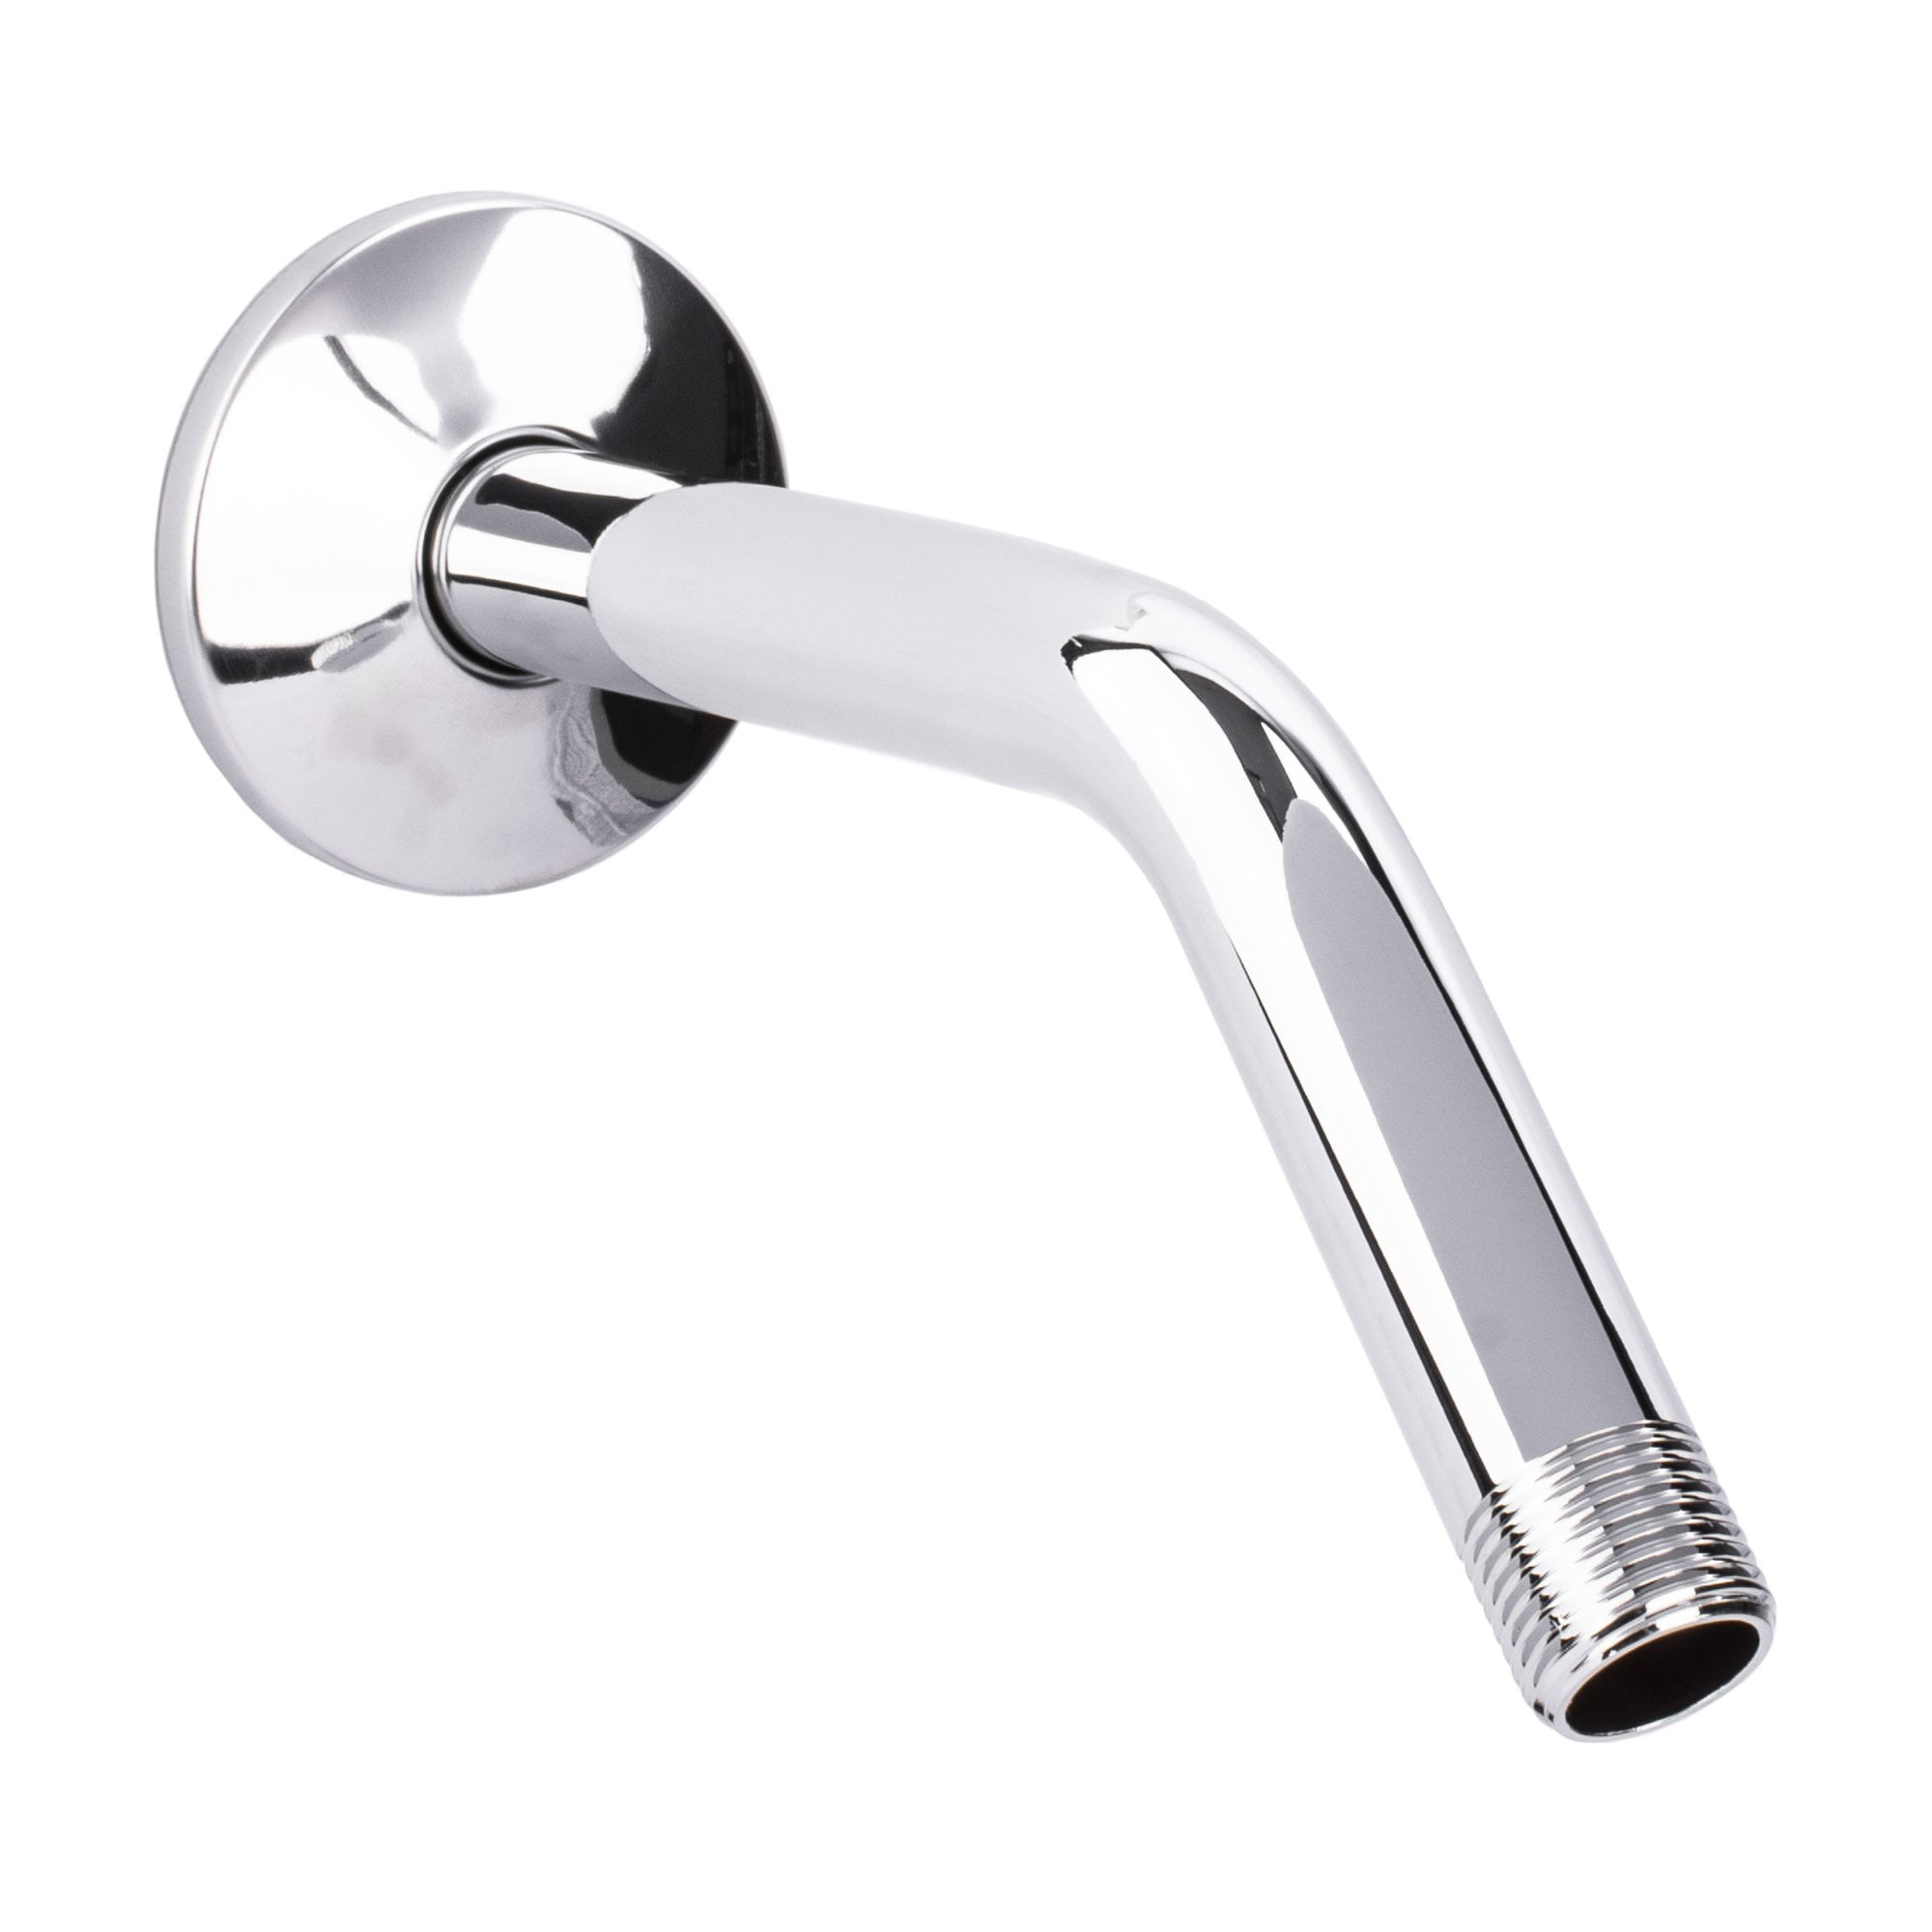 Shower Head Extension 8 Inch Shower Arm And Flange Stainless Steel Construction 